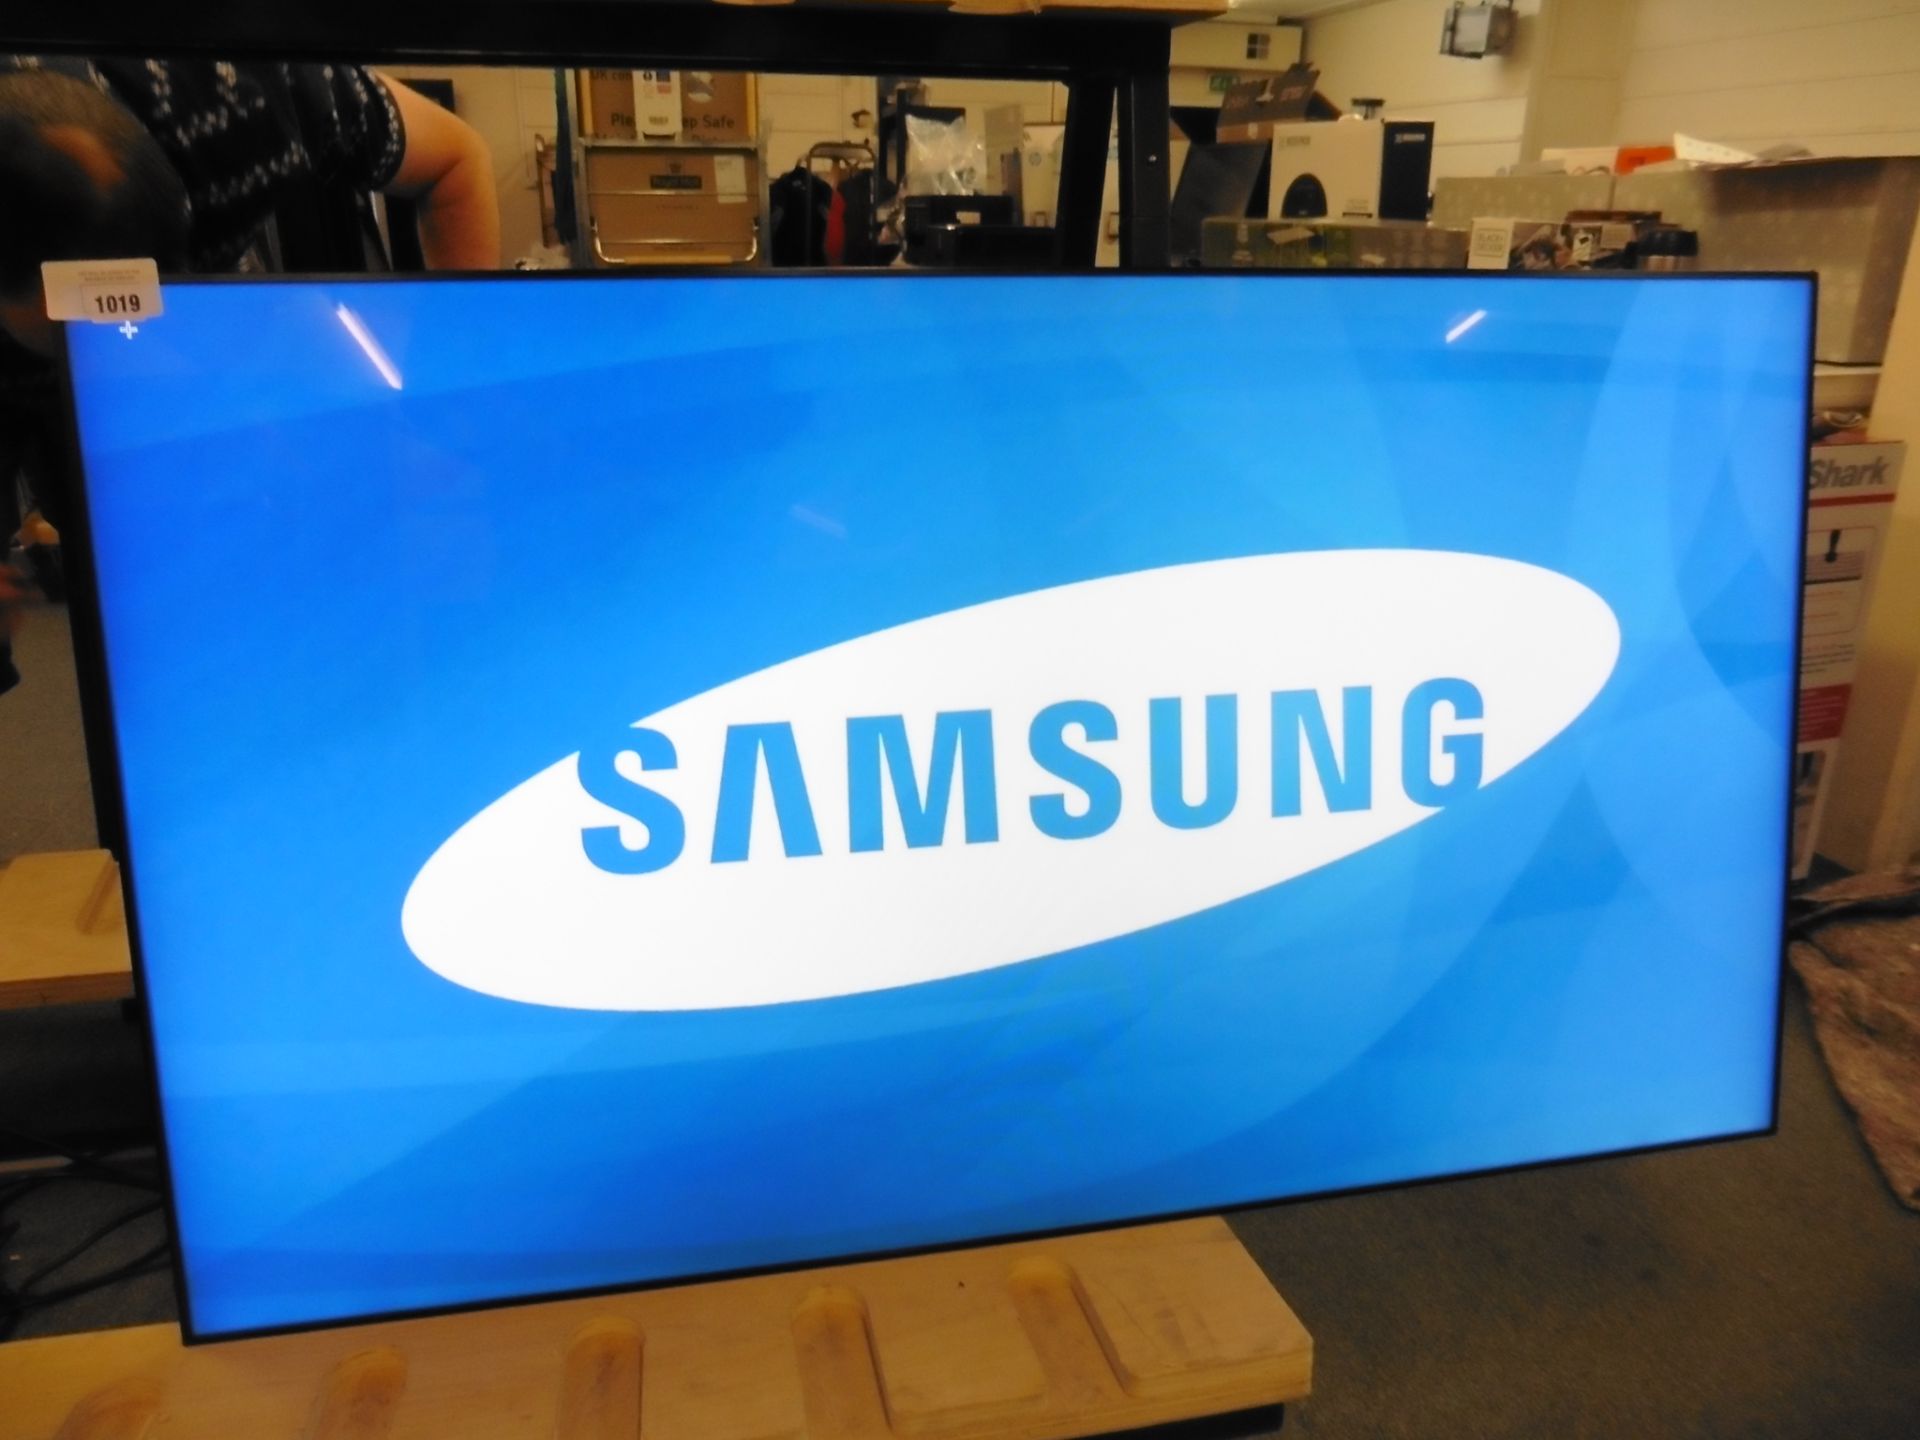 Samsung model UE55D professional 55'' colour display with remote (manufactured 2016)